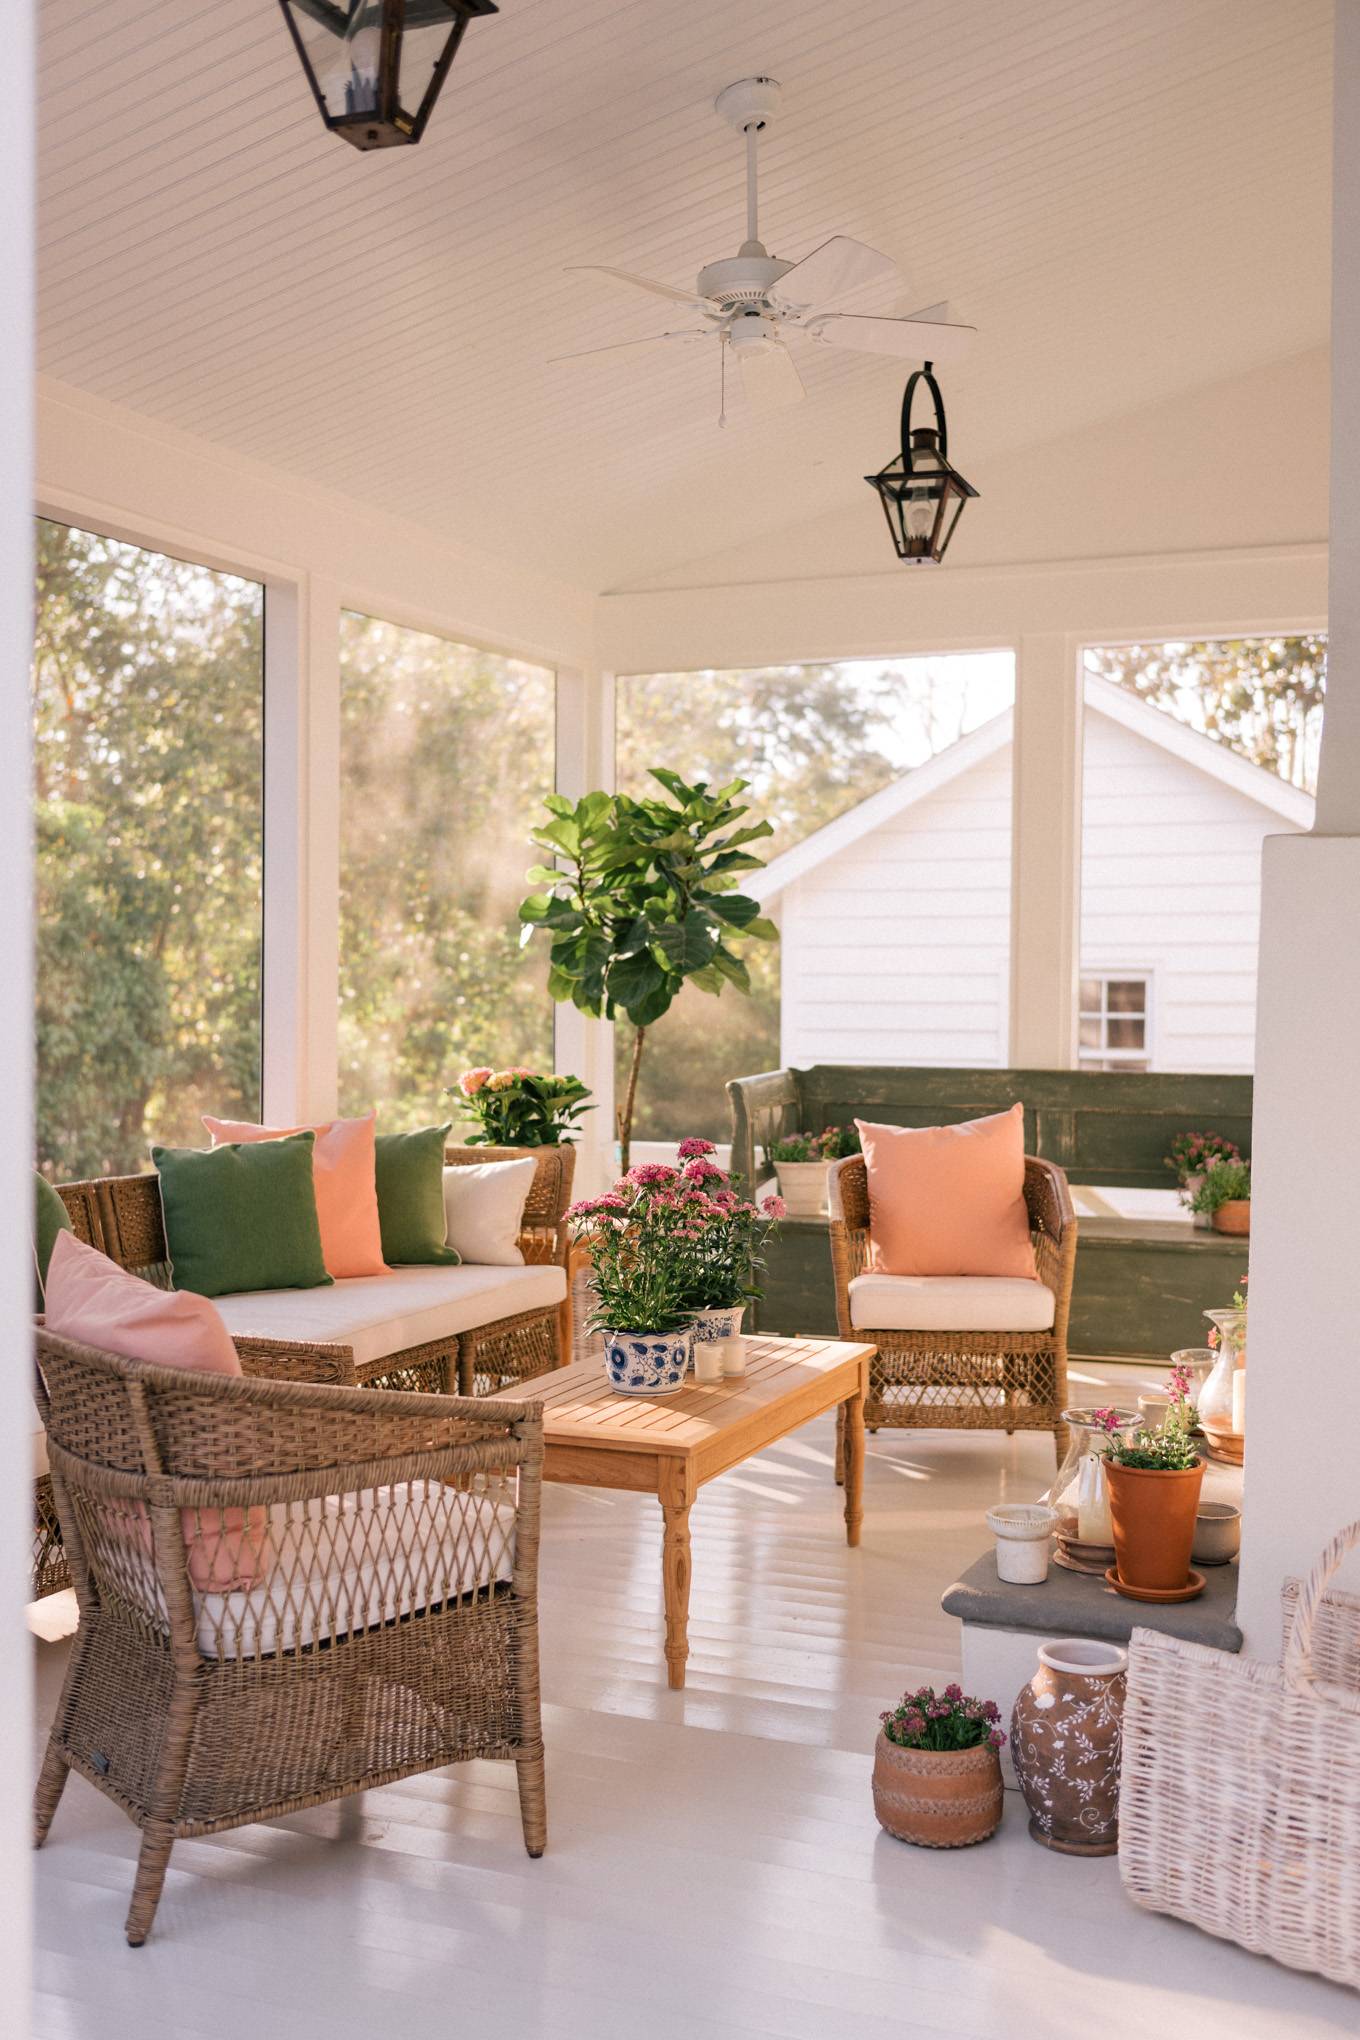 outdoor porch with woven furniture, pinka nd green pillows and floral accents